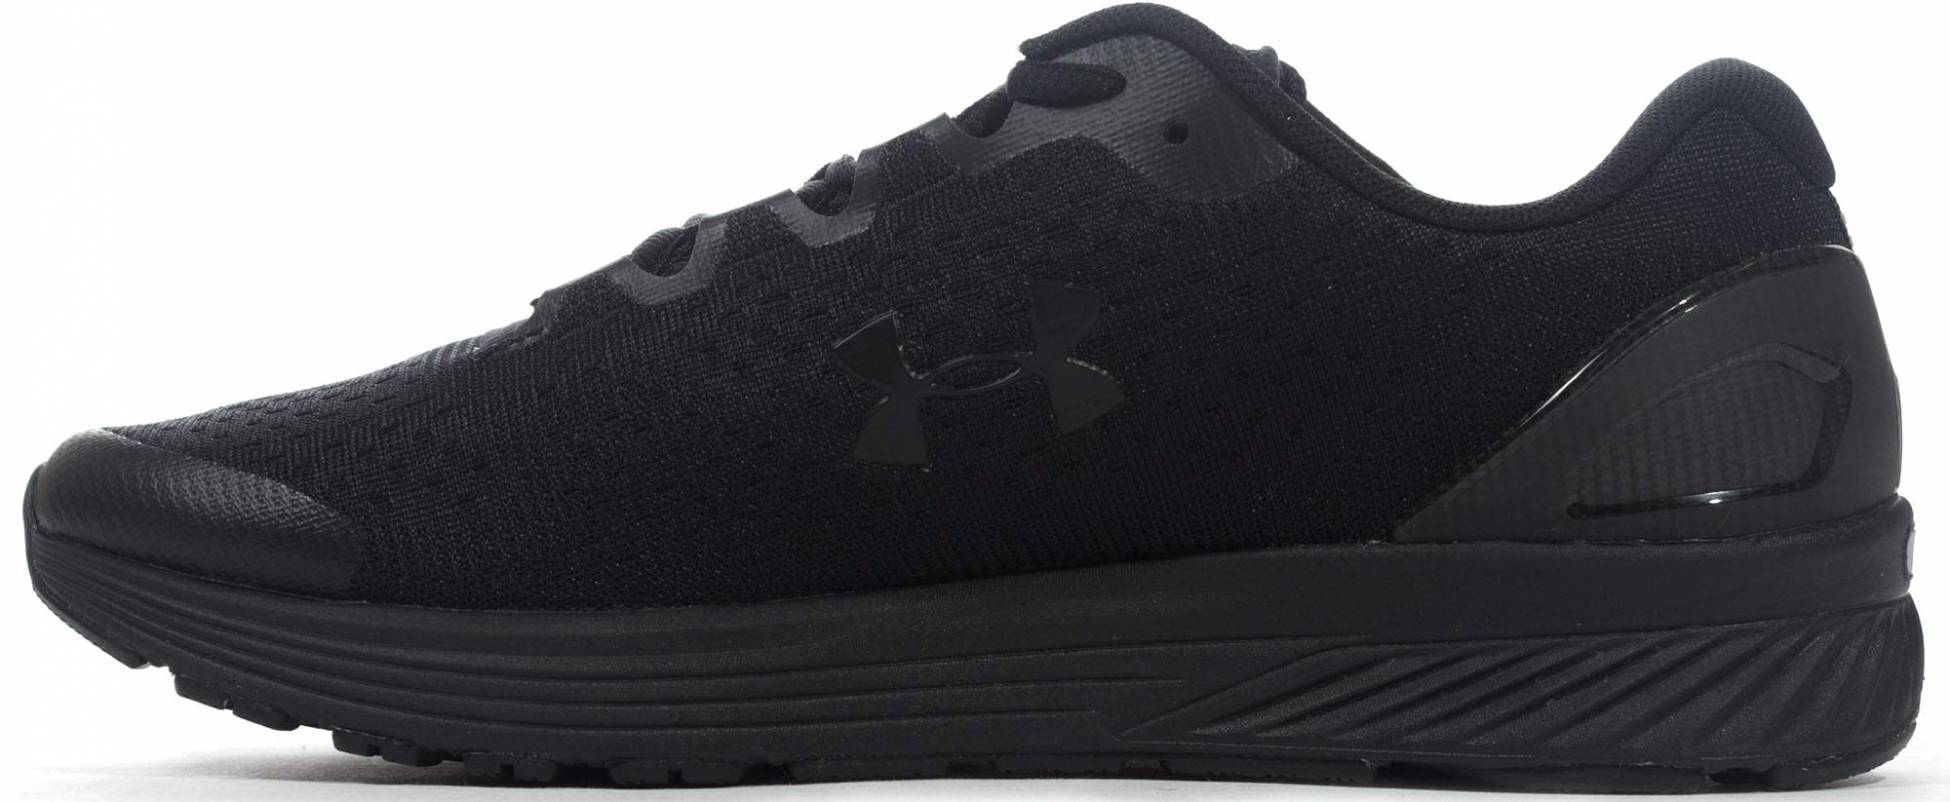 Under Armour womens Charged Bandit 4 